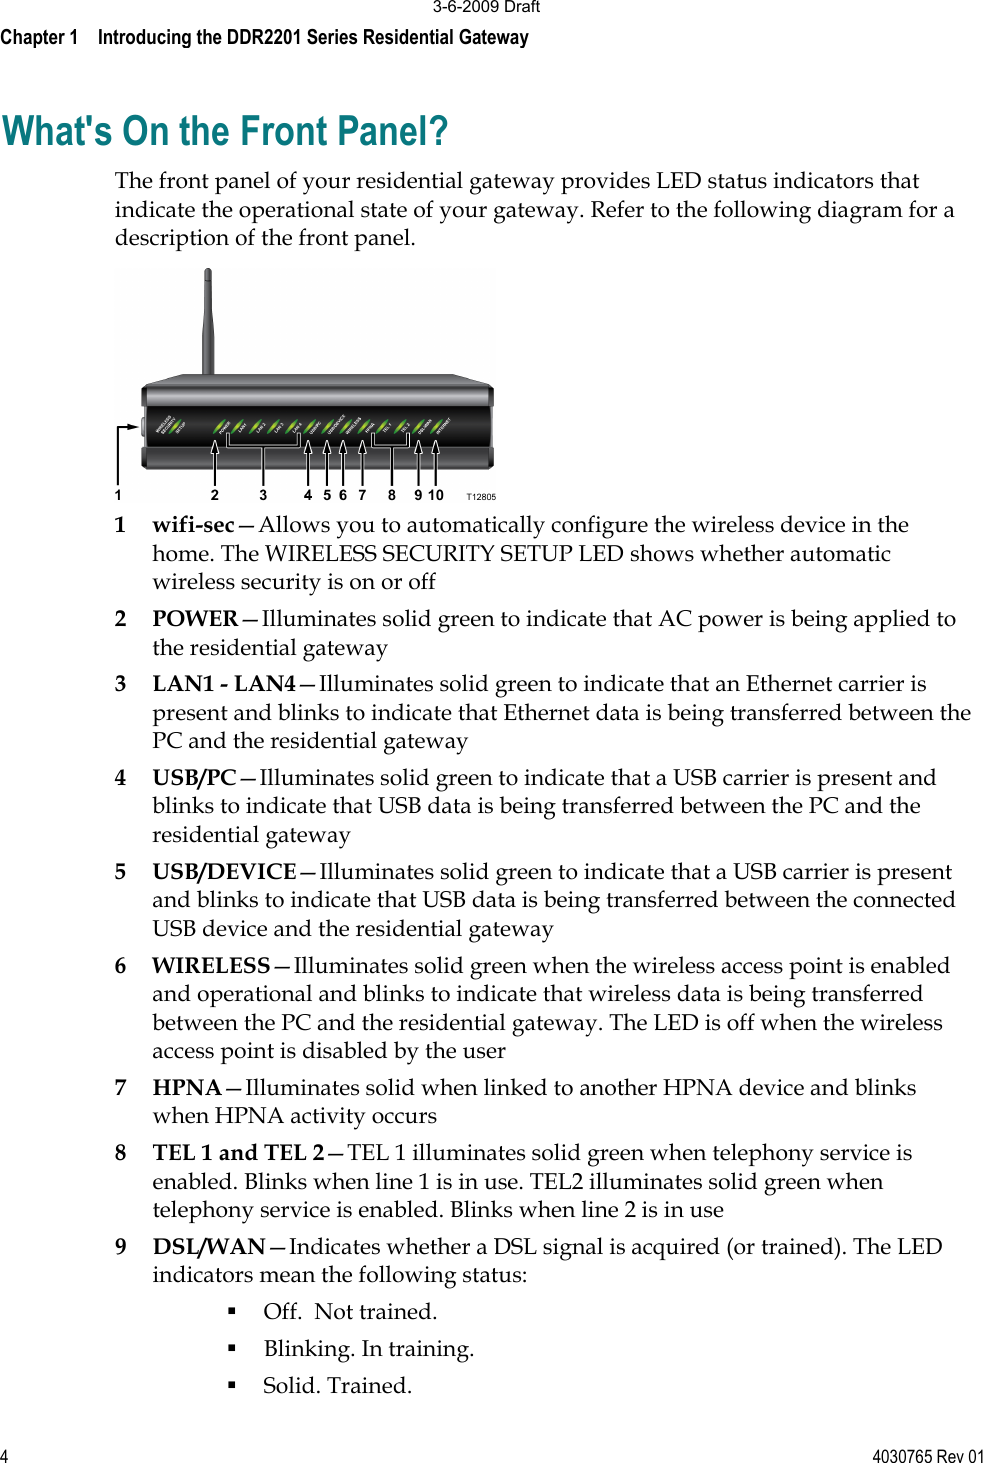 Chapter 1    Introducing the DDR2201 Series Residential Gateway4  4030765 Rev 01What&apos;s On the Front Panel? The front panel of your residential gateway provides LED status indicators that indicate the operational state of your gateway. Refer to the following diagram for a description of the front panel. 1wifi-sec—Allows you to automatically configure the wireless device in the home. The WIRELESS SECURITY SETUP LED shows whether automatic wireless security is on or off 2 POWER—Illuminates solid green to indicate that AC power is being applied to the residential gateway3LAN1 - LAN4—Illuminates solid green to indicate that an Ethernet carrier is present and blinks to indicate that Ethernet data is being transferred between the PC and the residential gateway 4USB/PC—Illuminates solid green to indicate that a USB carrier is present and blinks to indicate that USB data is being transferred between the PC and the residential gateway 5USB/DEVICE—Illuminates solid green to indicate that a USB carrier is present and blinks to indicate that USB data is being transferred between the connected USB device and the residential gateway 6WIRELESS—Illuminates solid green when the wireless access point is enabled and operational and blinks to indicate that wireless data is being transferred between the PC and the residential gateway. The LED is off when the wireless access point is disabled by the user7HPNA—Illuminates solid when linked to another HPNA device and blinks when HPNA activity occurs 8TEL 1 and TEL 2—TEL 1 illuminates solid green when telephony service isenabled. Blinks when line 1 is in use. TEL2 illuminates solid green when telephony service is enabled. Blinks when line 2 is in use 9DSL/WAN—Indicates whether a DSL signal is acquired (or trained). The LED indicators mean the following status:Off.  Not trained. Blinking. In training. Solid. Trained. 3-6-2009 Draft